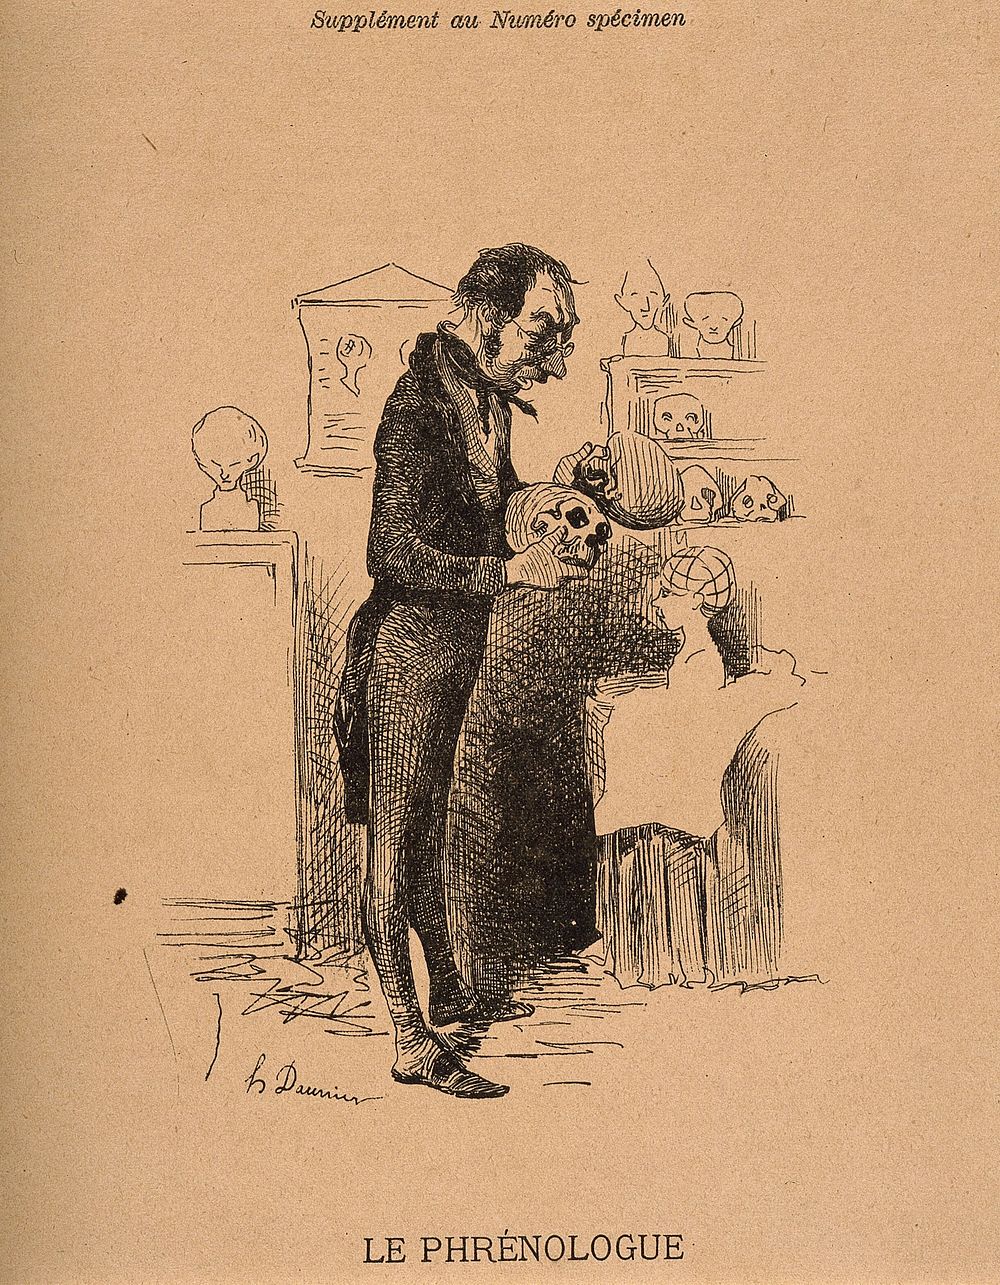 A phrenologist examines two skulls from his collection. Reproduction of an etching by H. Daumier.